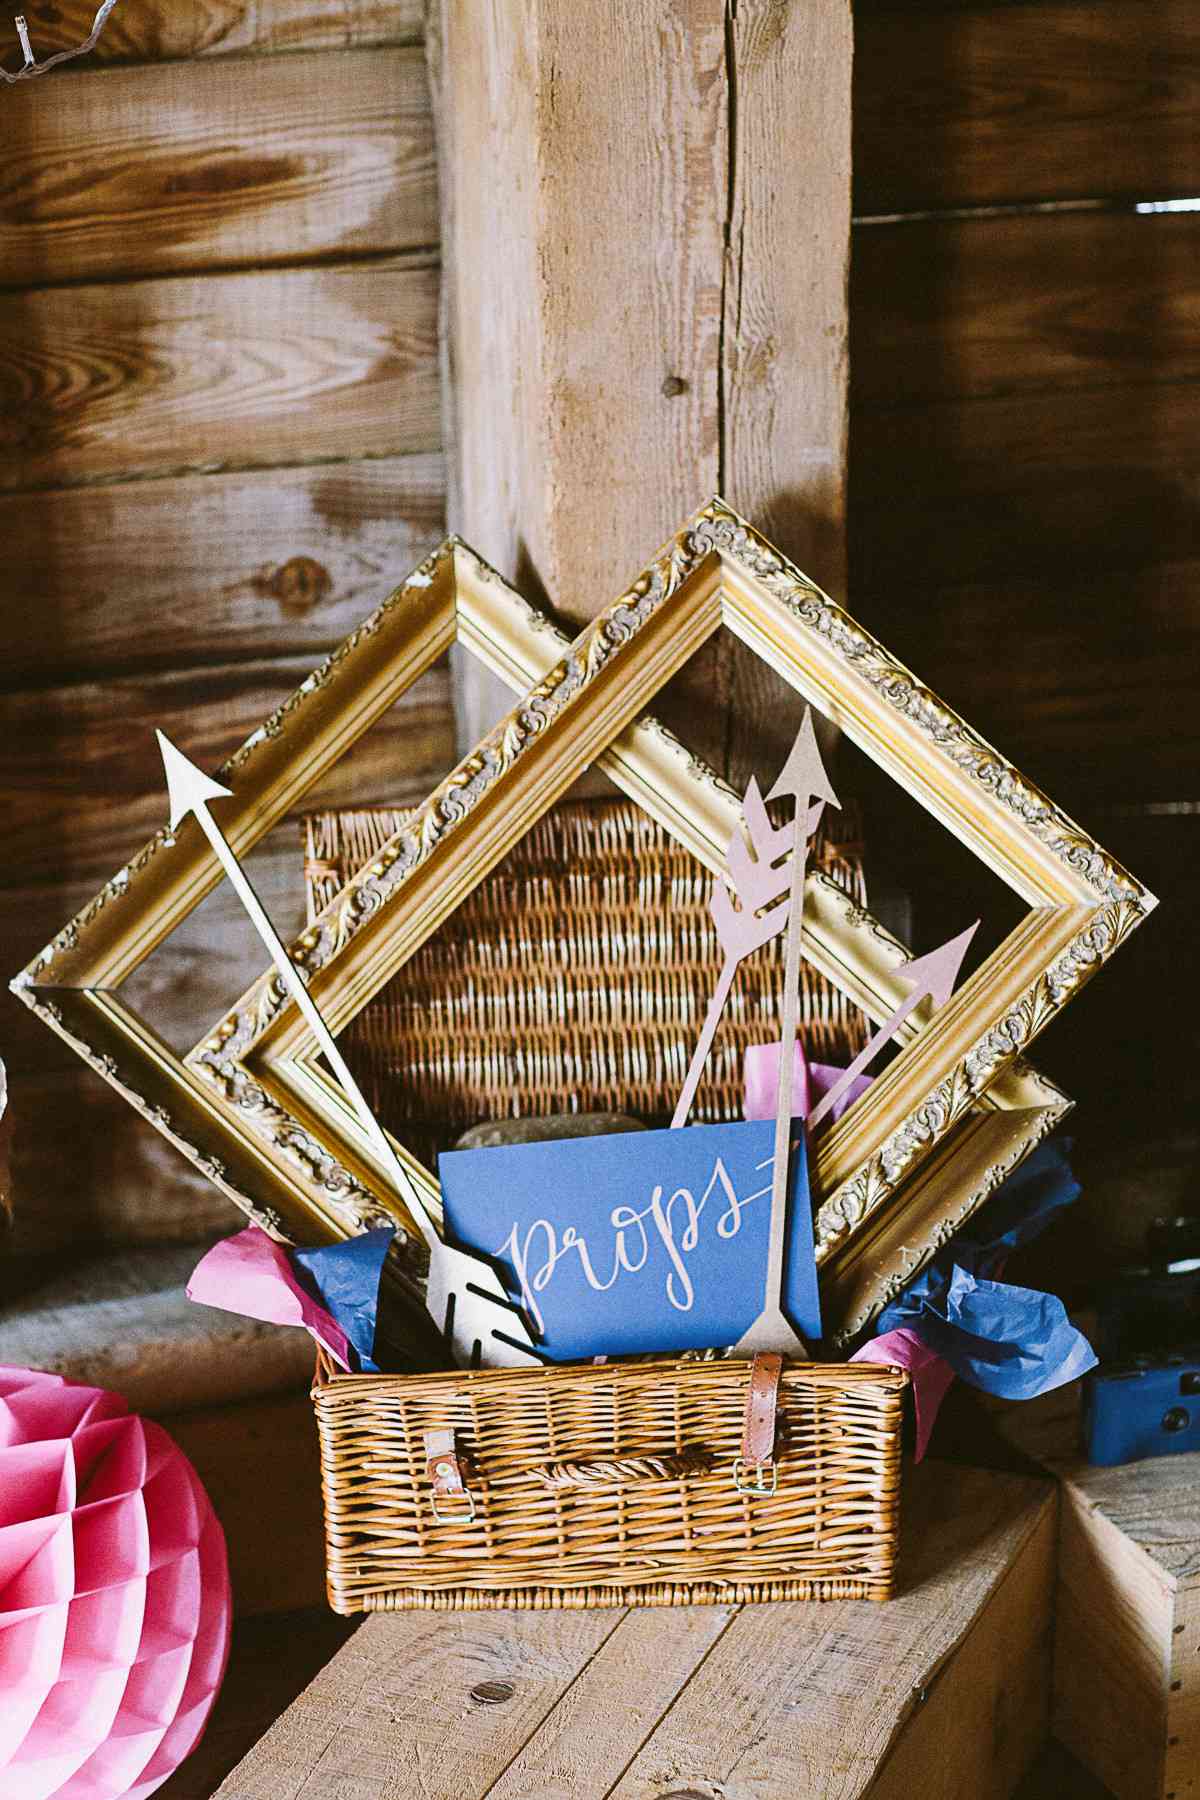 Details about   Unique Wedding Photo Booth Props Create Fun Photos 10 Count 